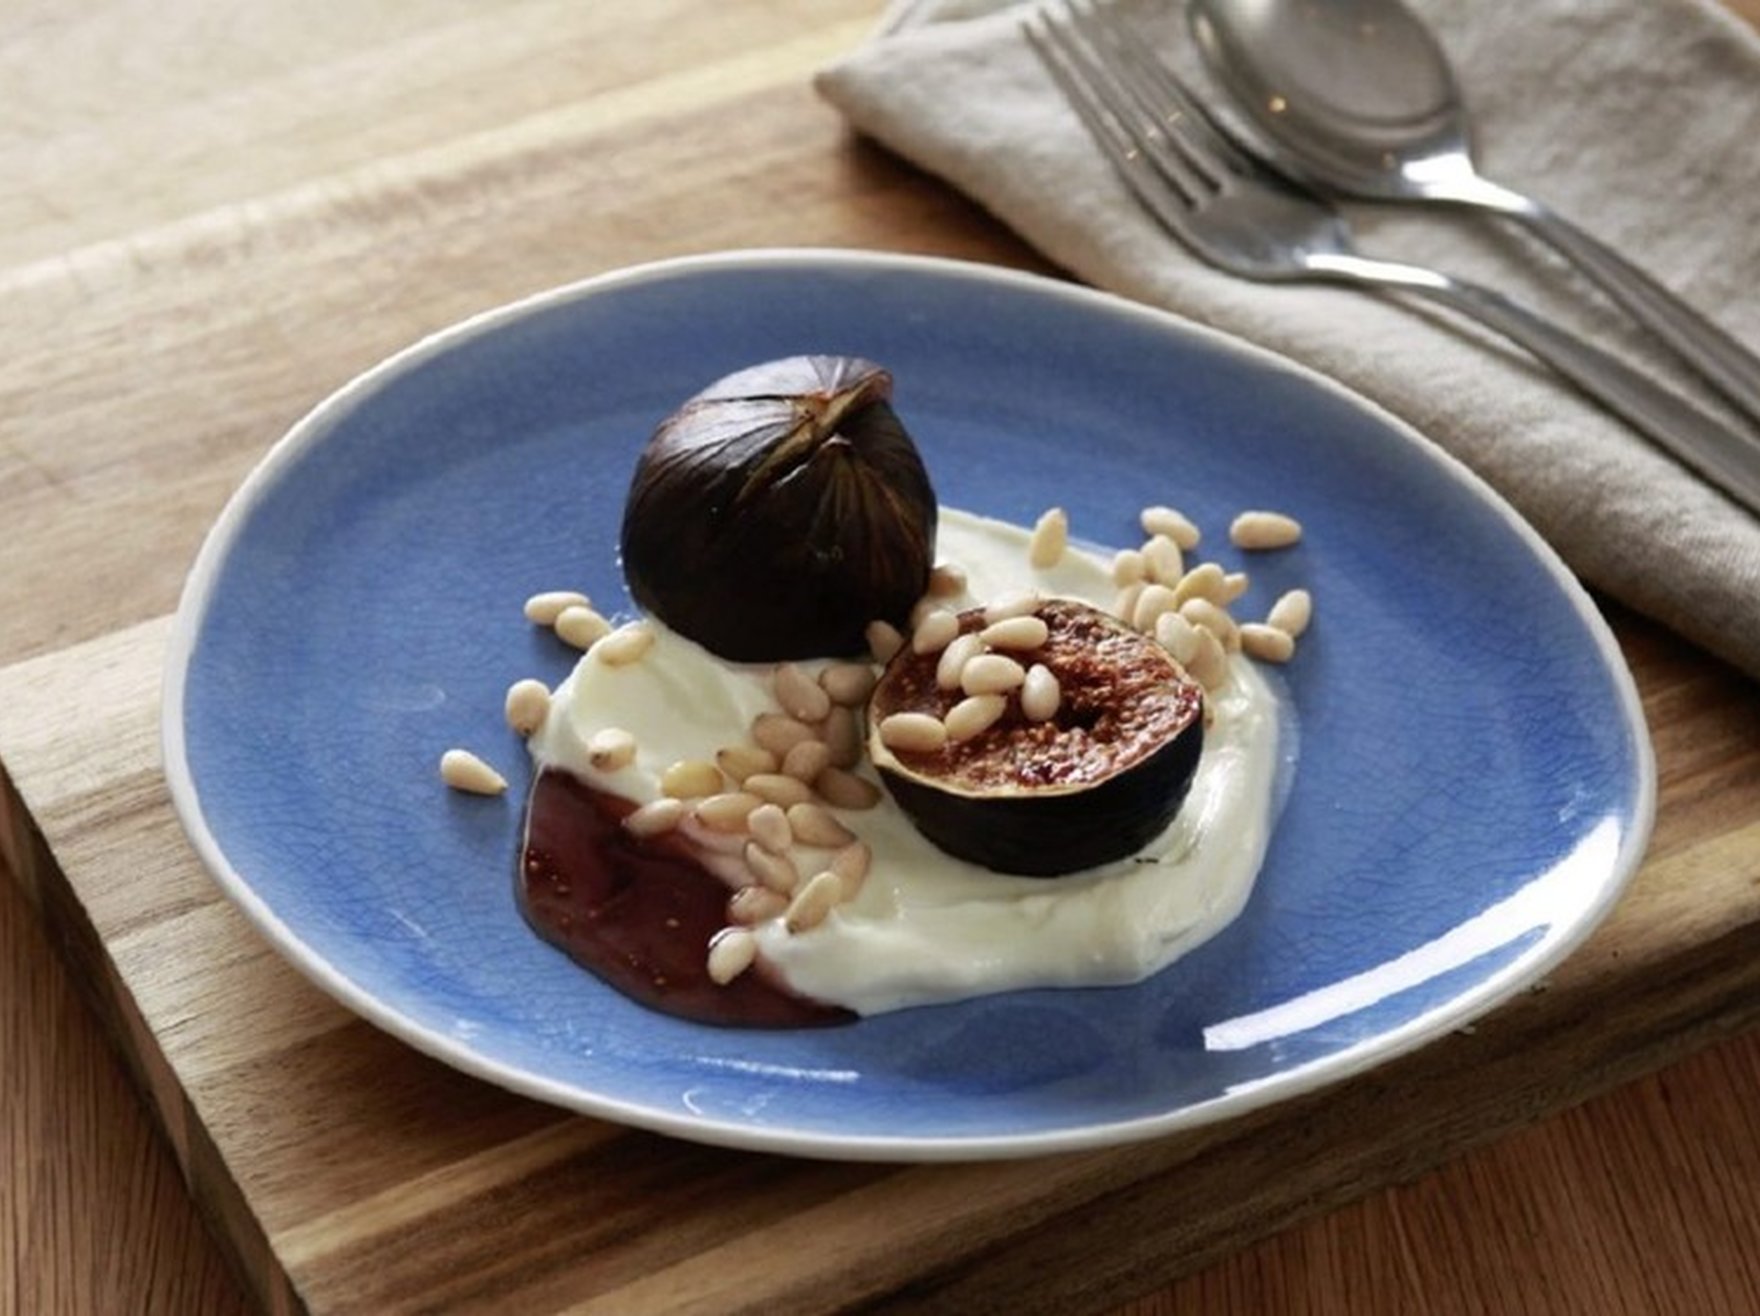 Yoghurt, toffee and figs with honey, and chocolate mousse